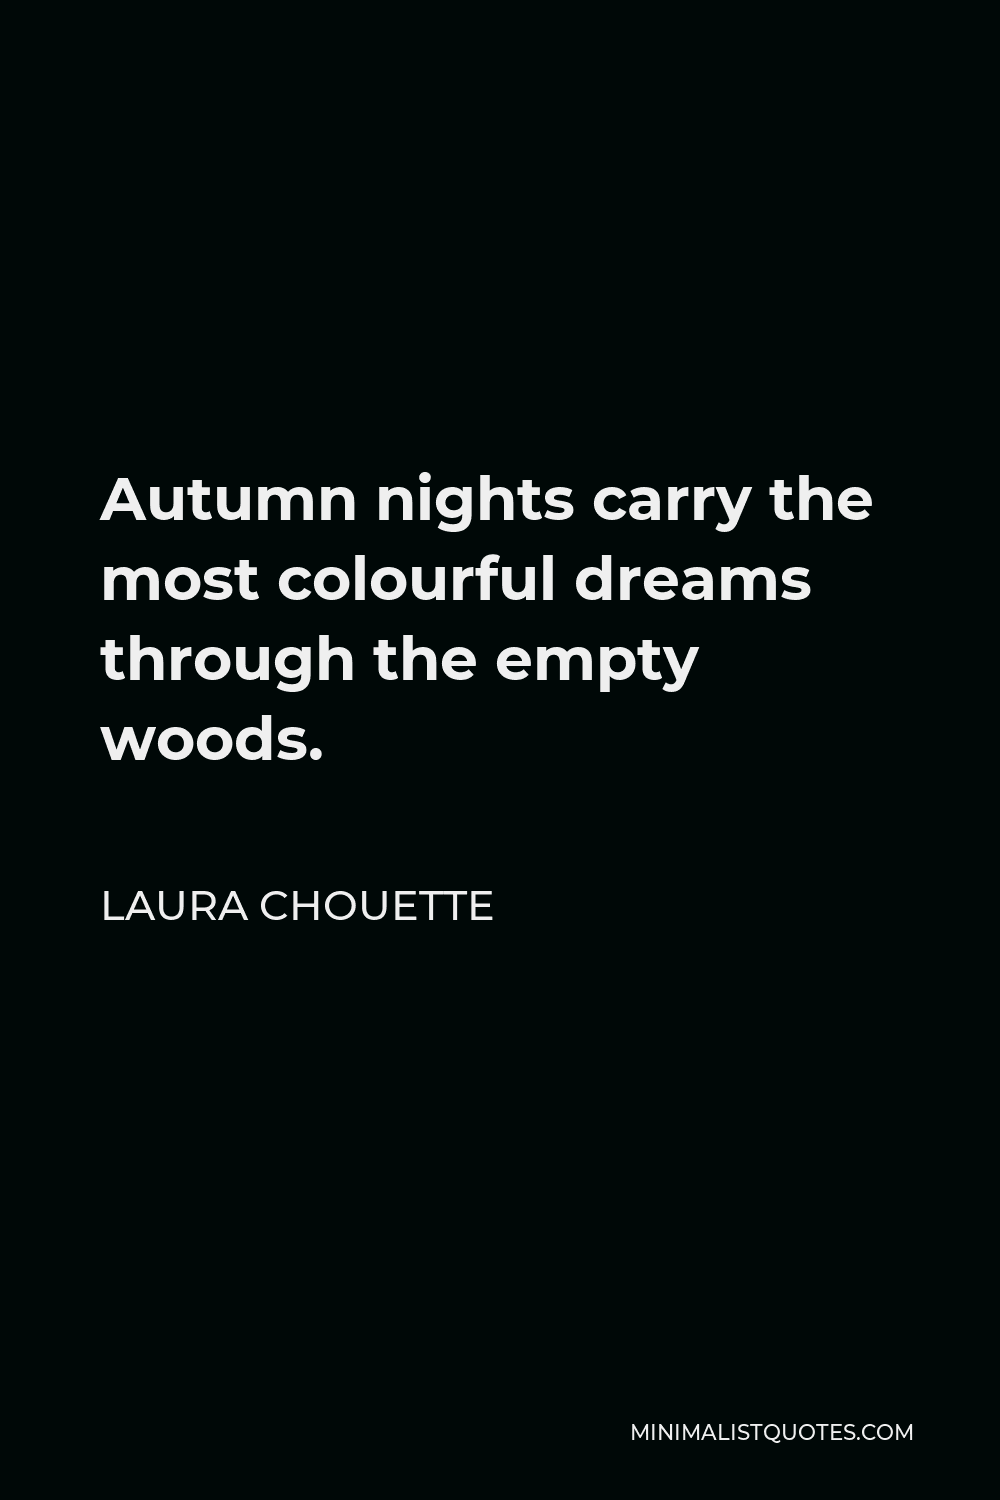 Laura Chouette Quote - Autumn nights carry the most colourful dreams through the empty woods.